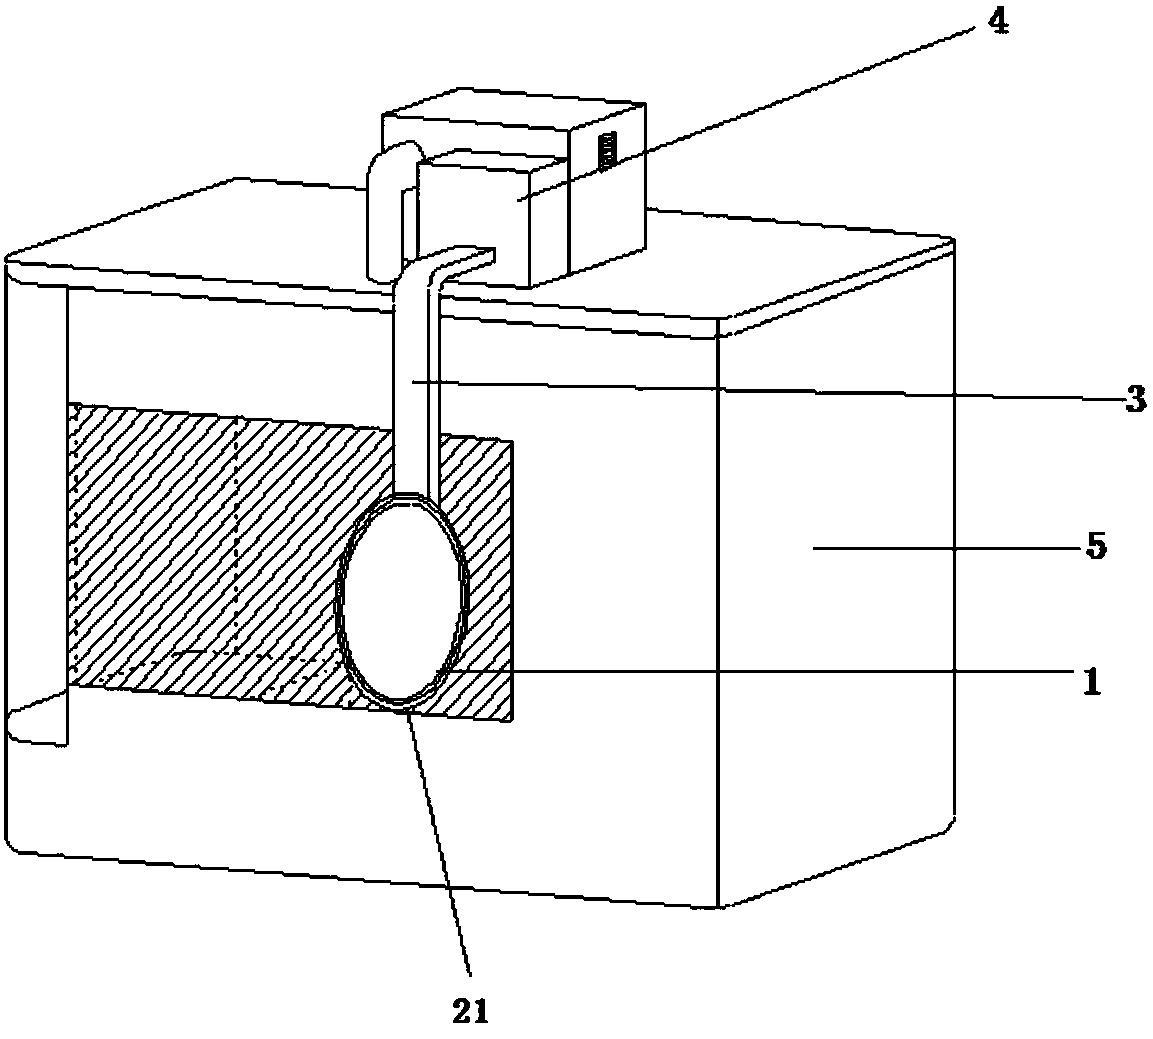 A double-type closed space external gas barrier device